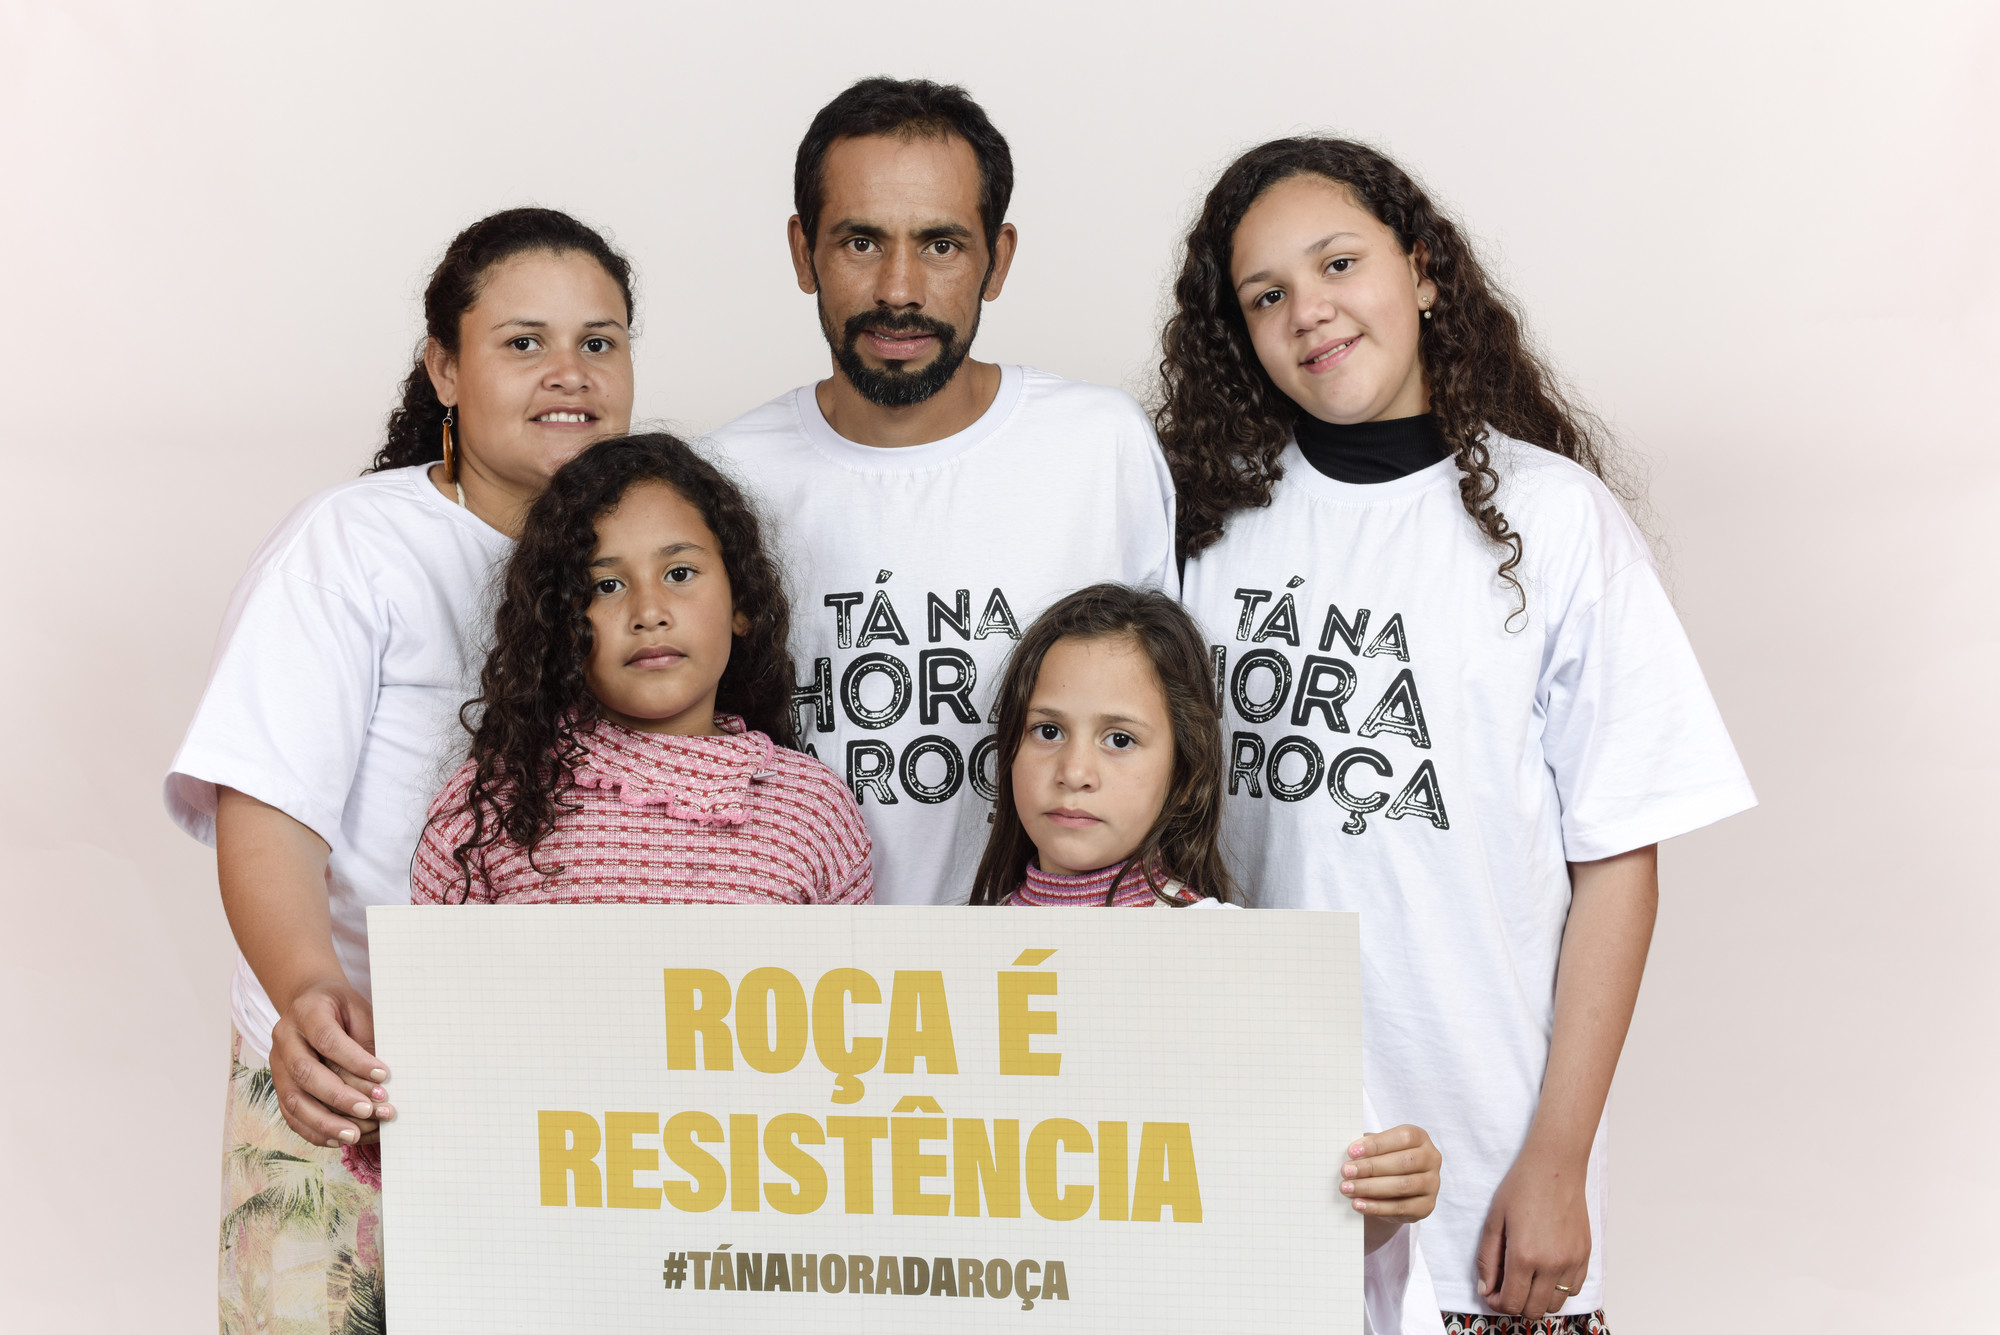 Vanilda Donato dos Santos and Vandir dos Santos with their daughters (from left to right) Ana Paula Donato dos Santos, Ana Beatriz Donato dos Santos and Ana Laura Donato dos Santos, from Quilombo Porto Velho, in the campaign "It's time for the countryside", which aimed to pressure the government of São Paulo to issue licenses for traditional quilombola swiddens @Clau